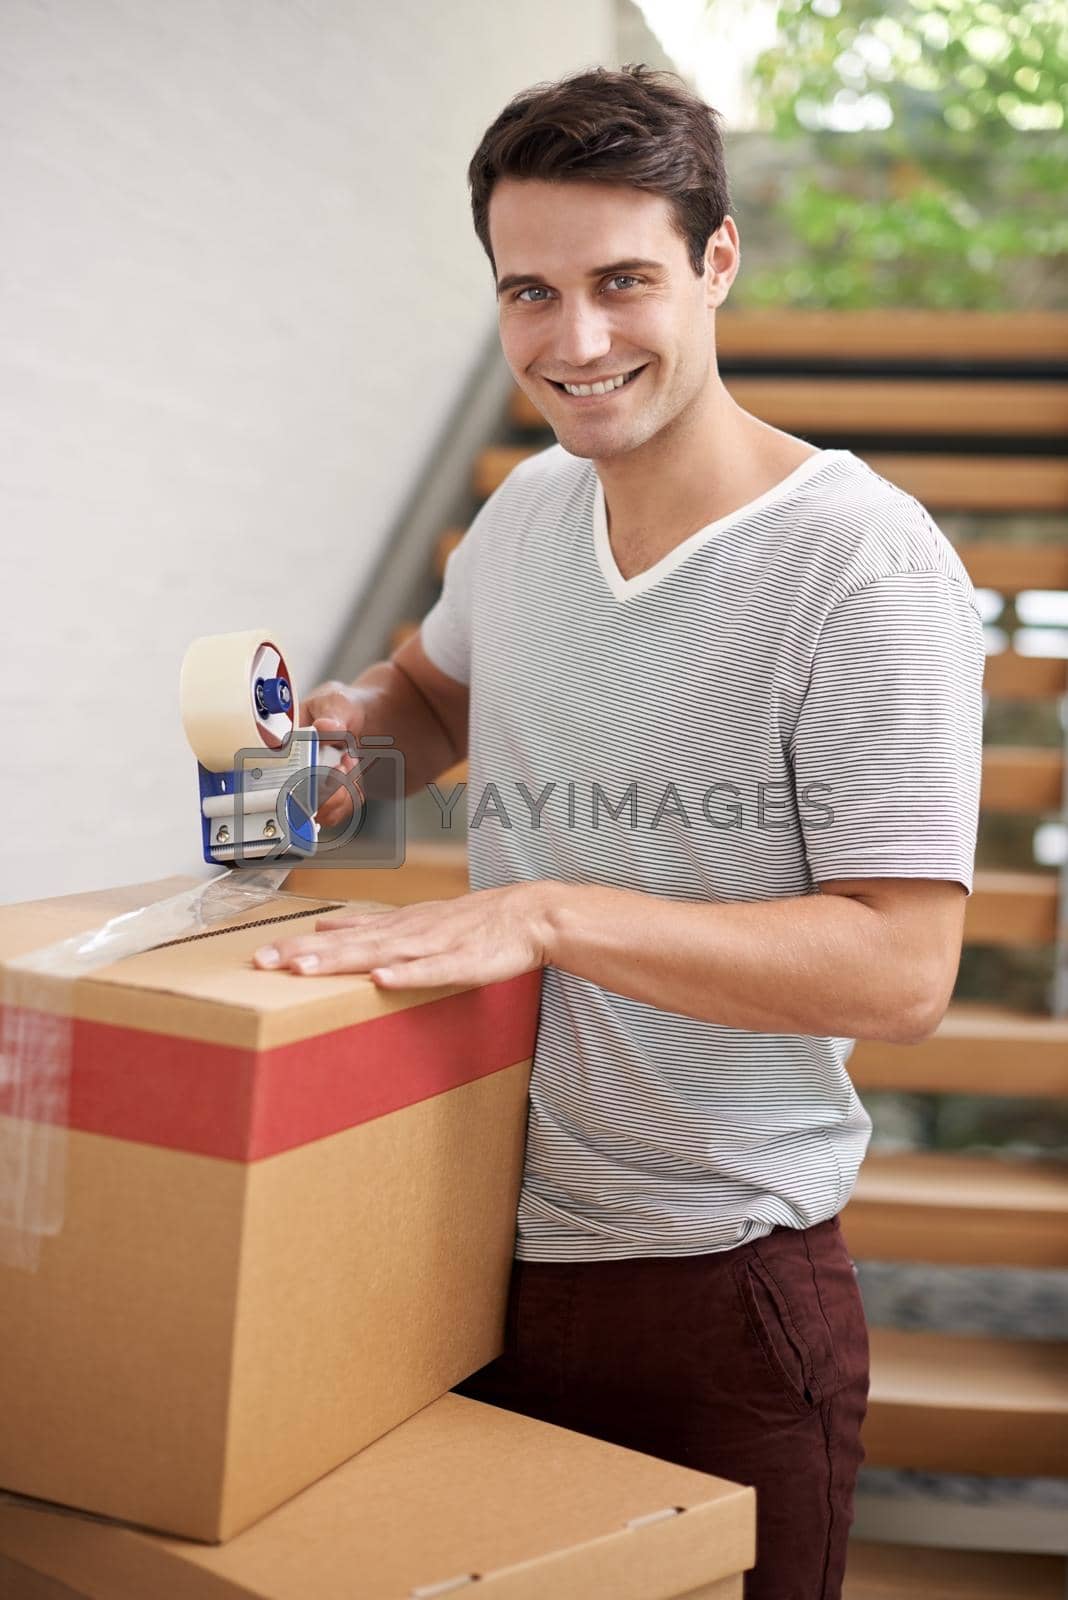 Royalty free image of Packing up and rearing to go. A happy young man packing cardboard boxes in his home. by YuriArcurs